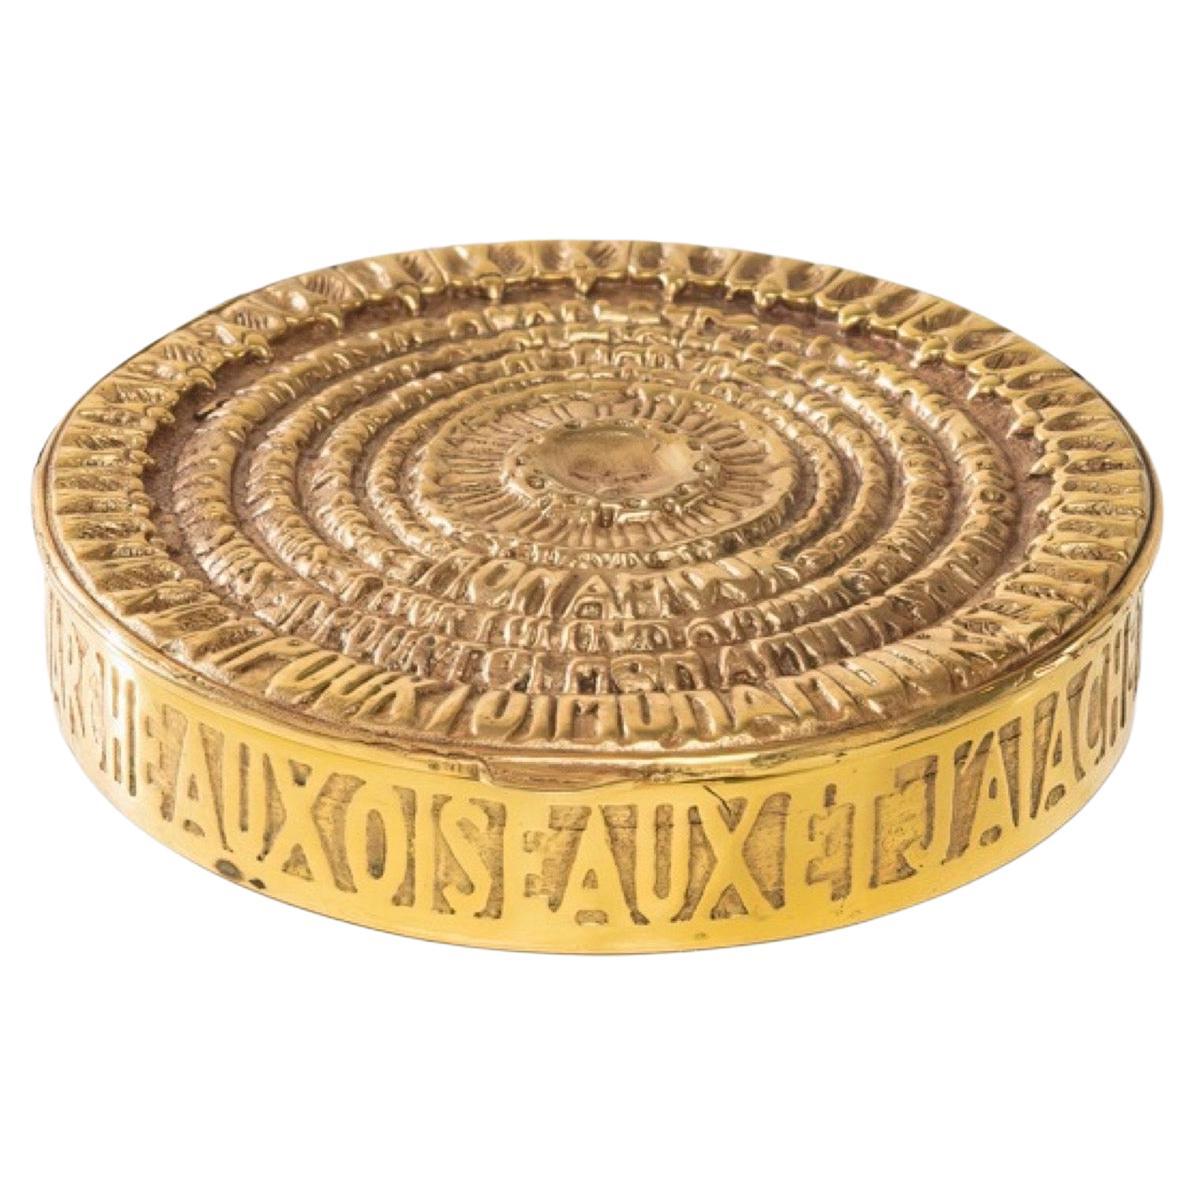 Pour toi mon Amour (For you my love) by Line Vautrin – Gilt bronze compact